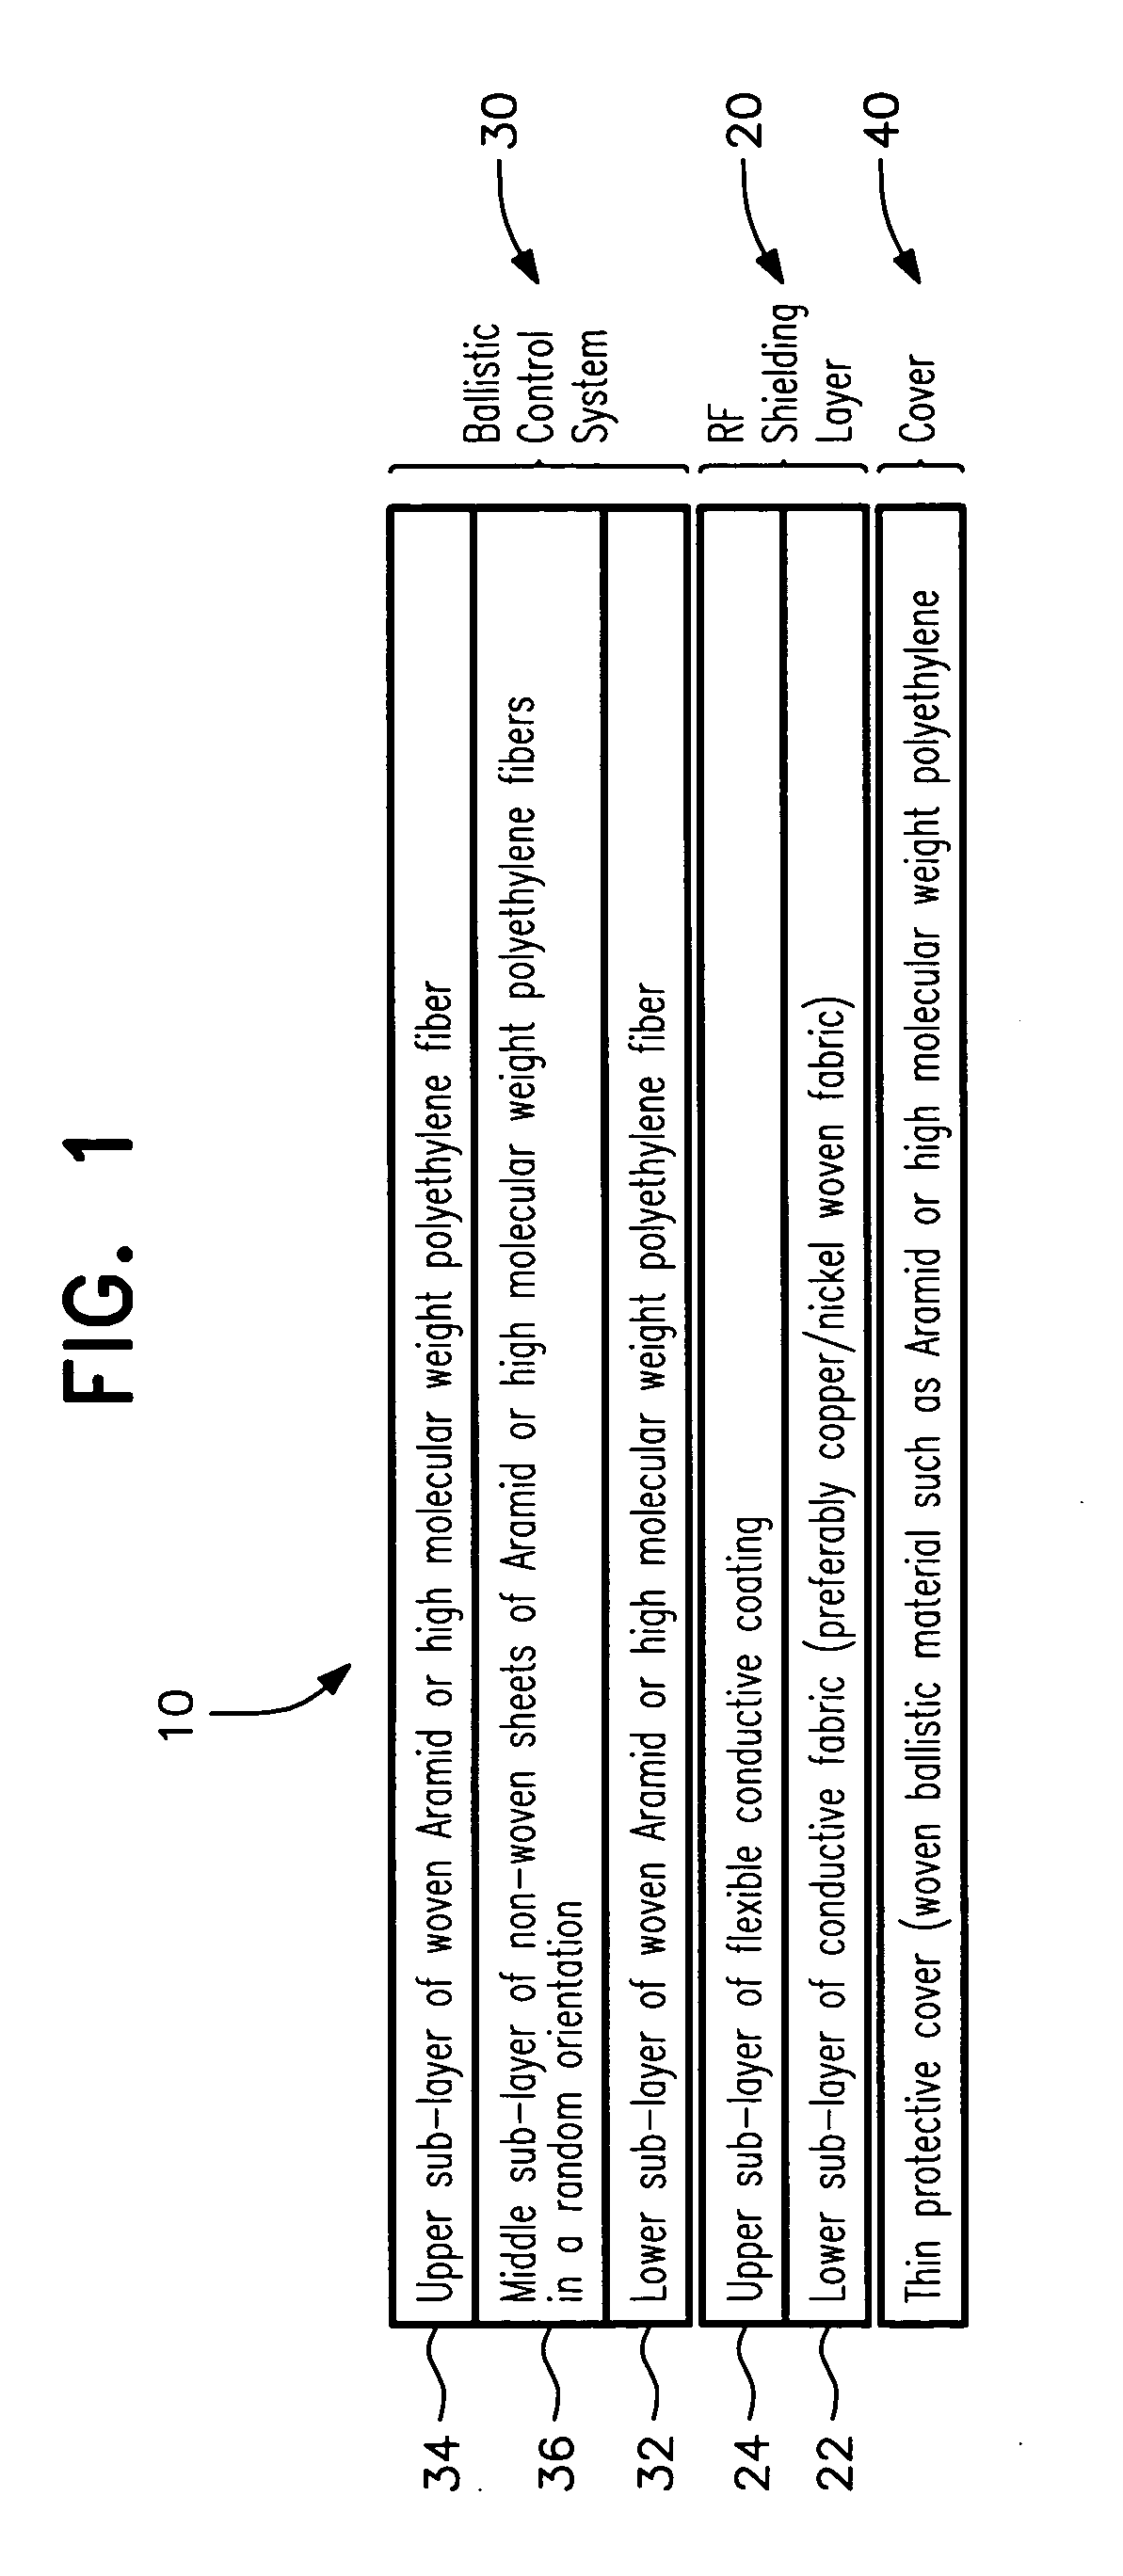 Electromagnetically shielded, flexible bomb suppression device